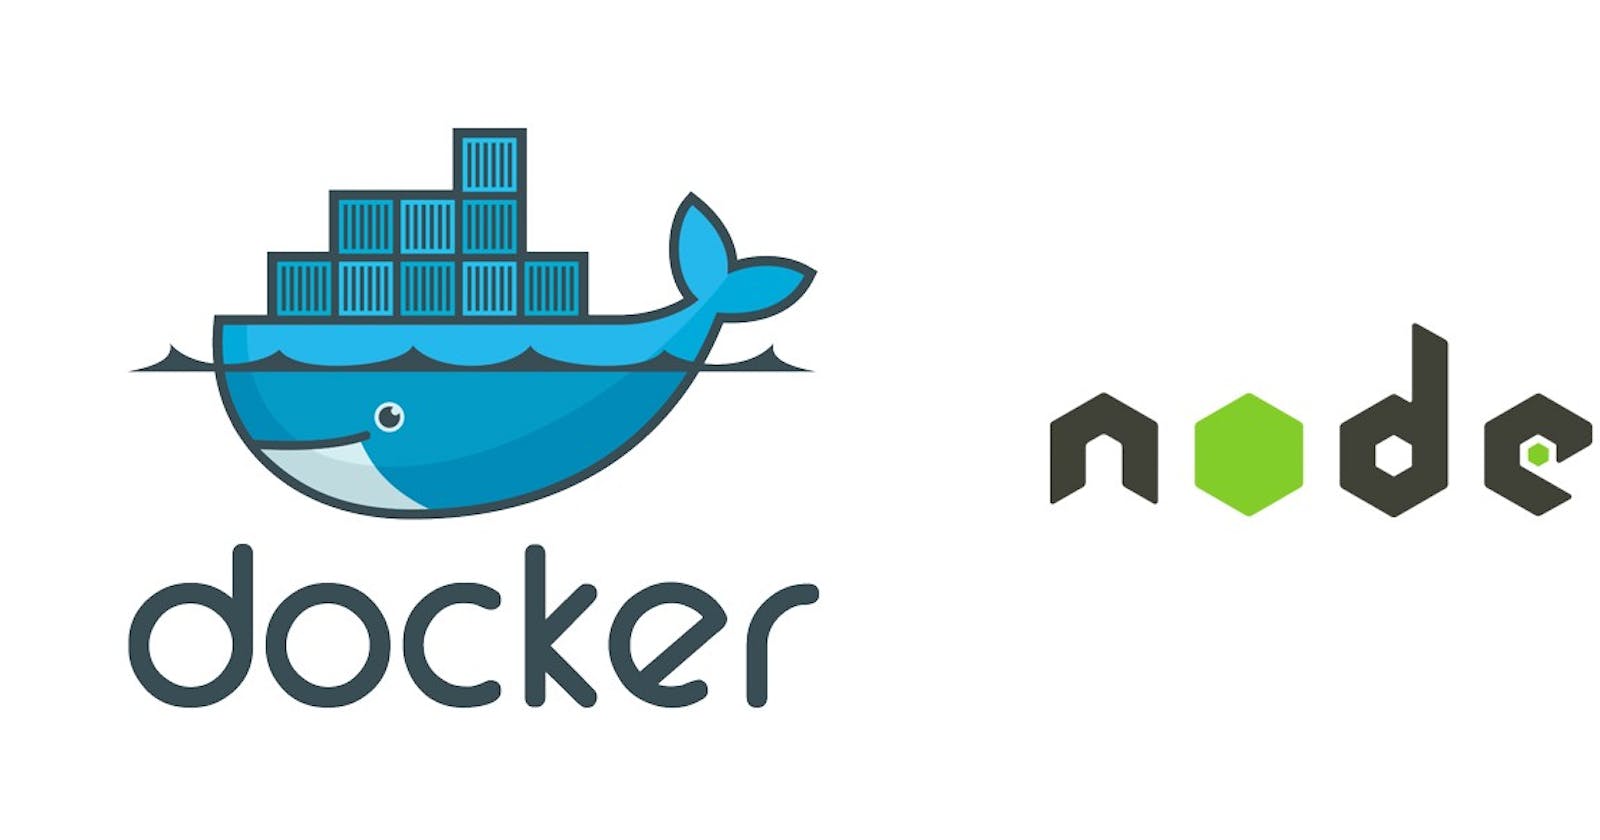 How to create a Node App within a Docker container with Mongo